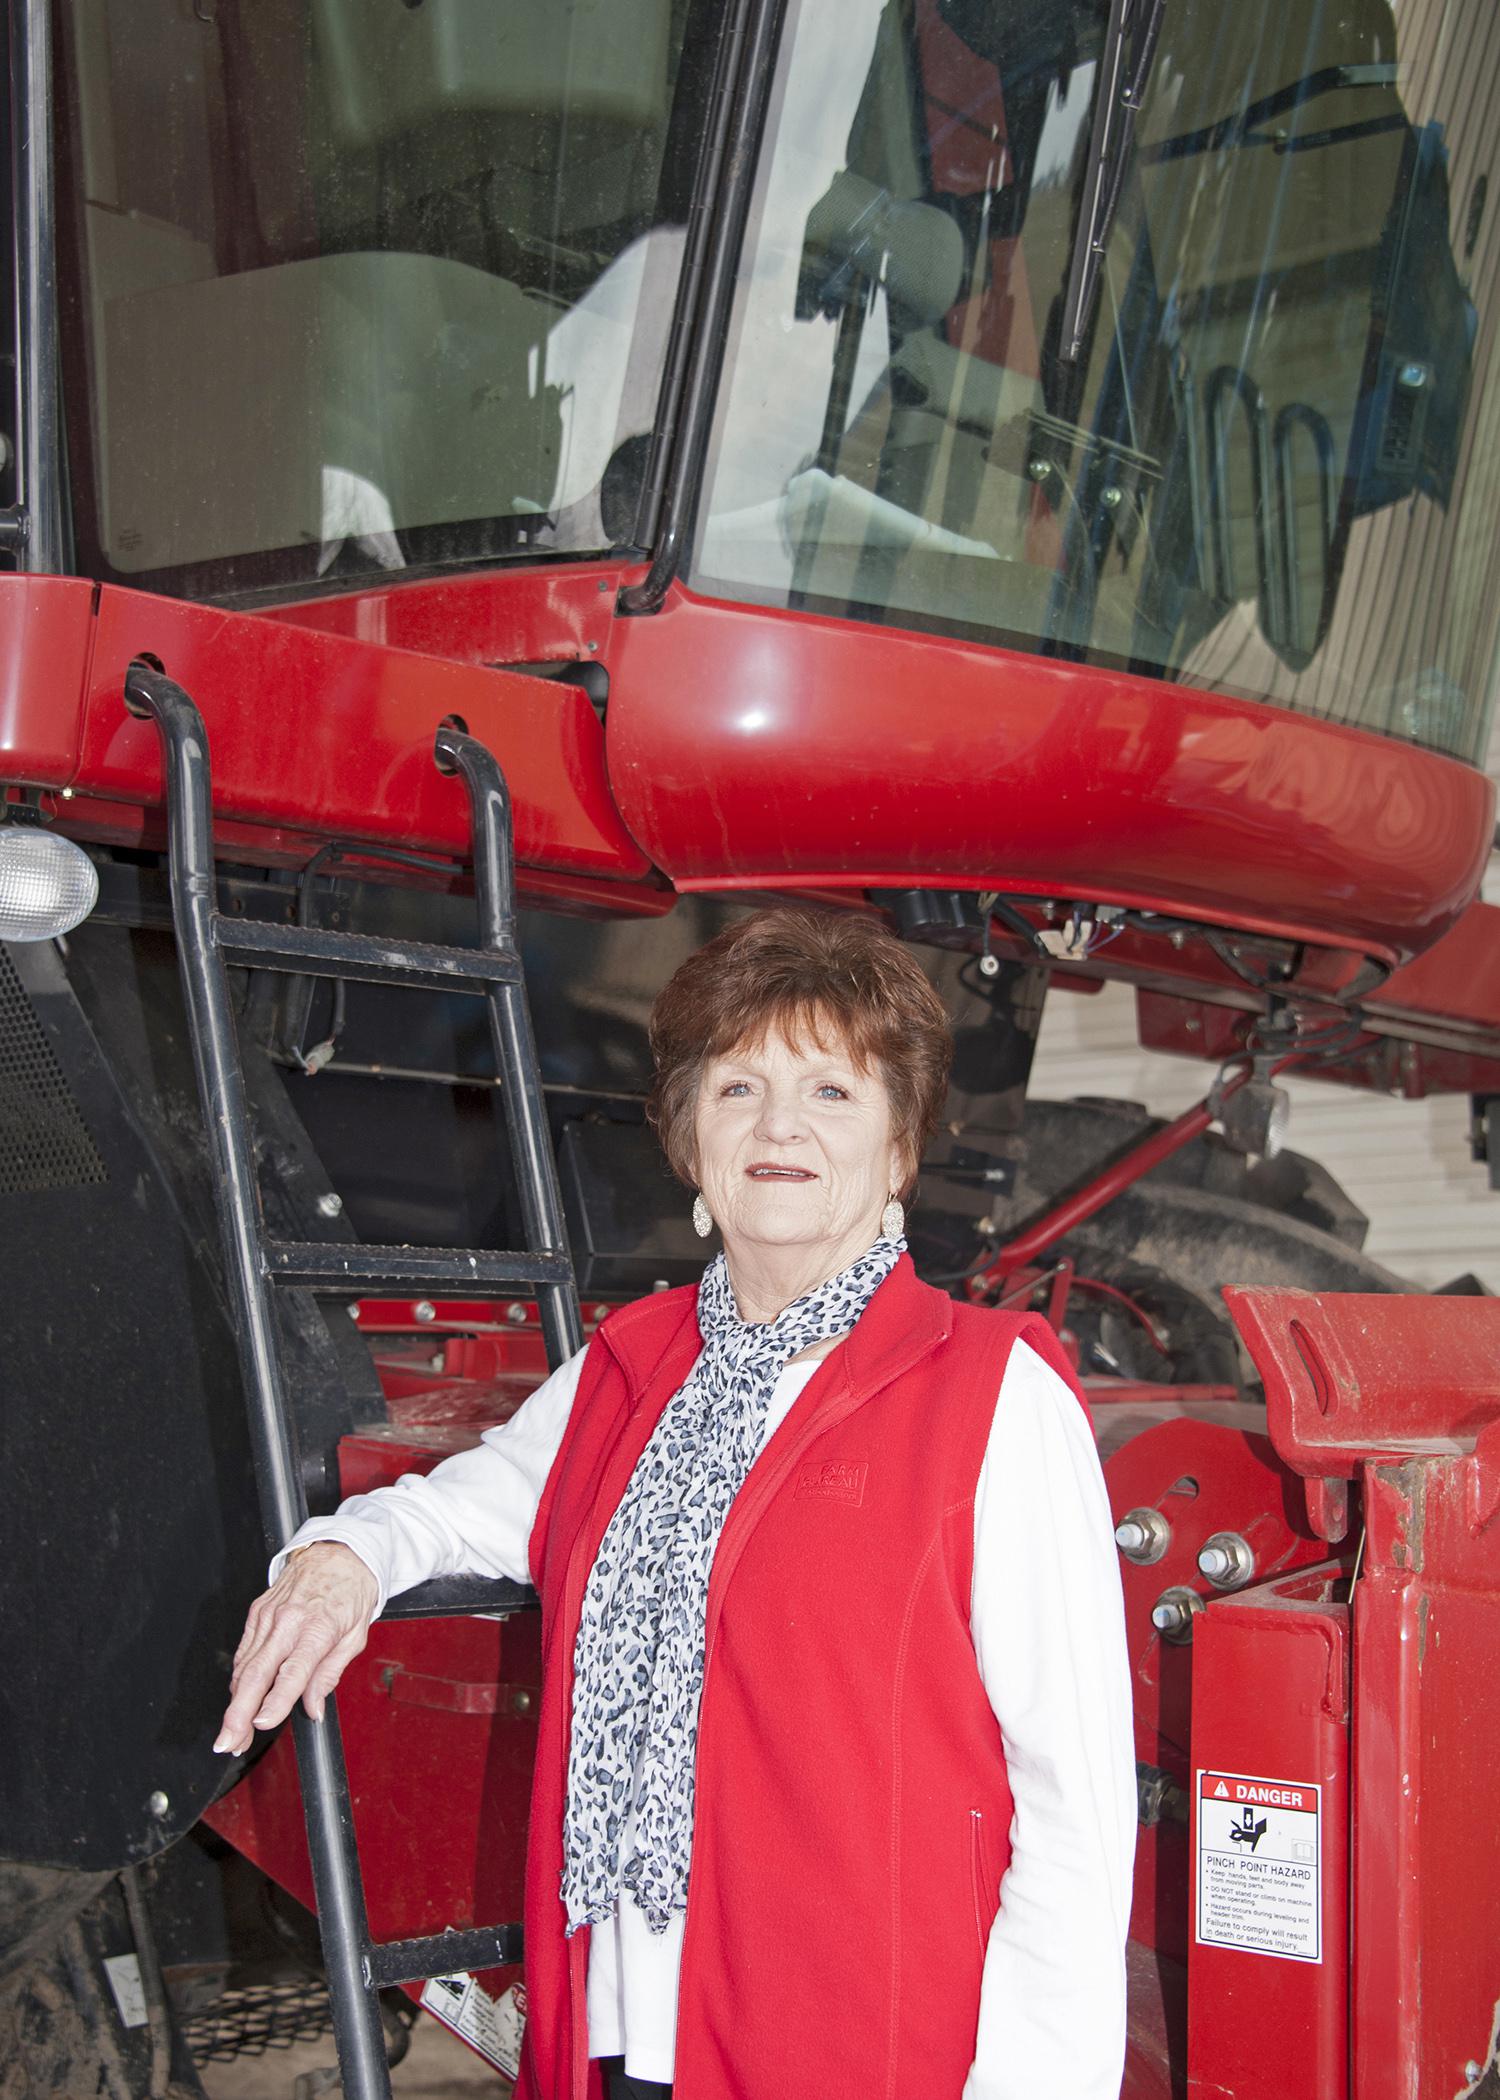 Wanda Hill, a Humphreys County farmer, helps promote agriculture throughout Mississippi because she feels farming is rewarding. (Photo by MSU Ag Communications/Kat Lawrence)